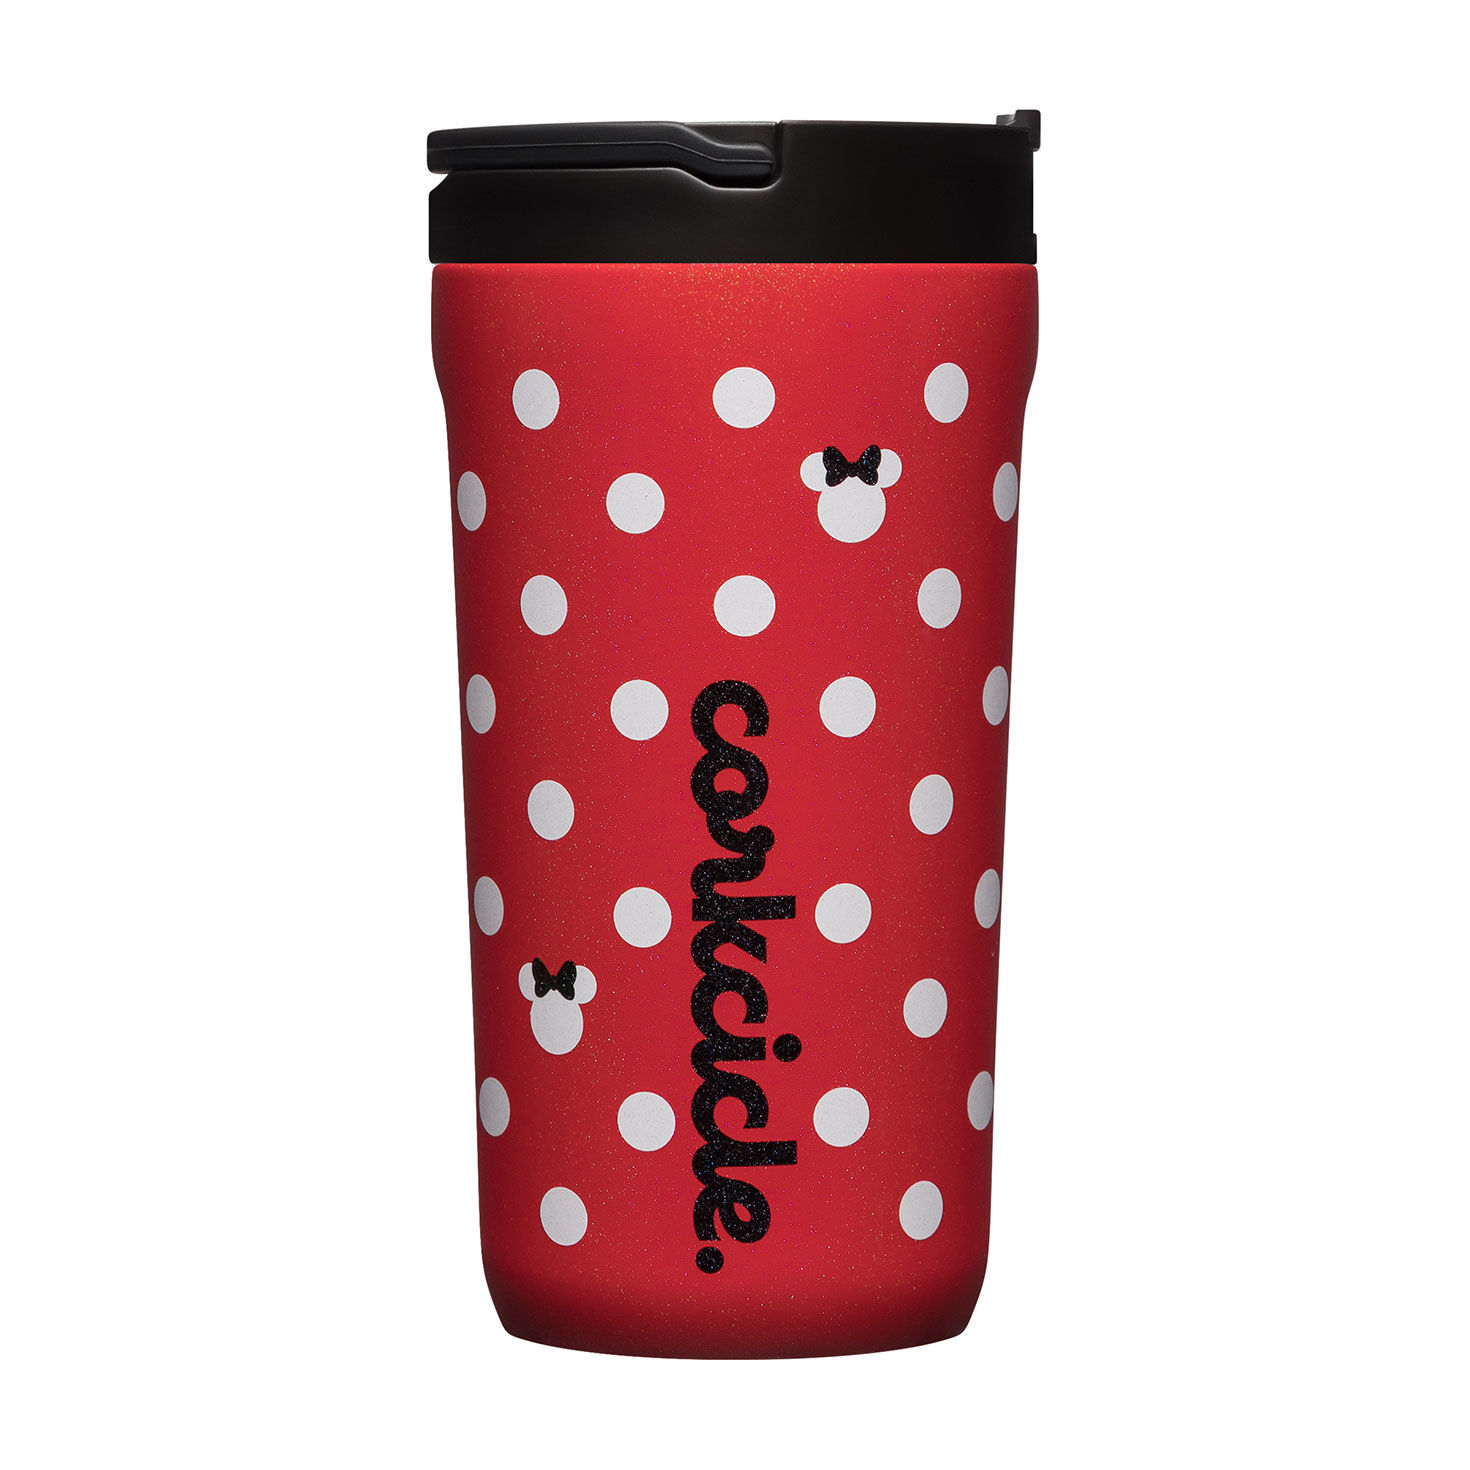 Corkcicle Disney Minnie Mouse Red Polka-Dot Kids Cup, 12 oz. for only USD 39.99 | Hallmark